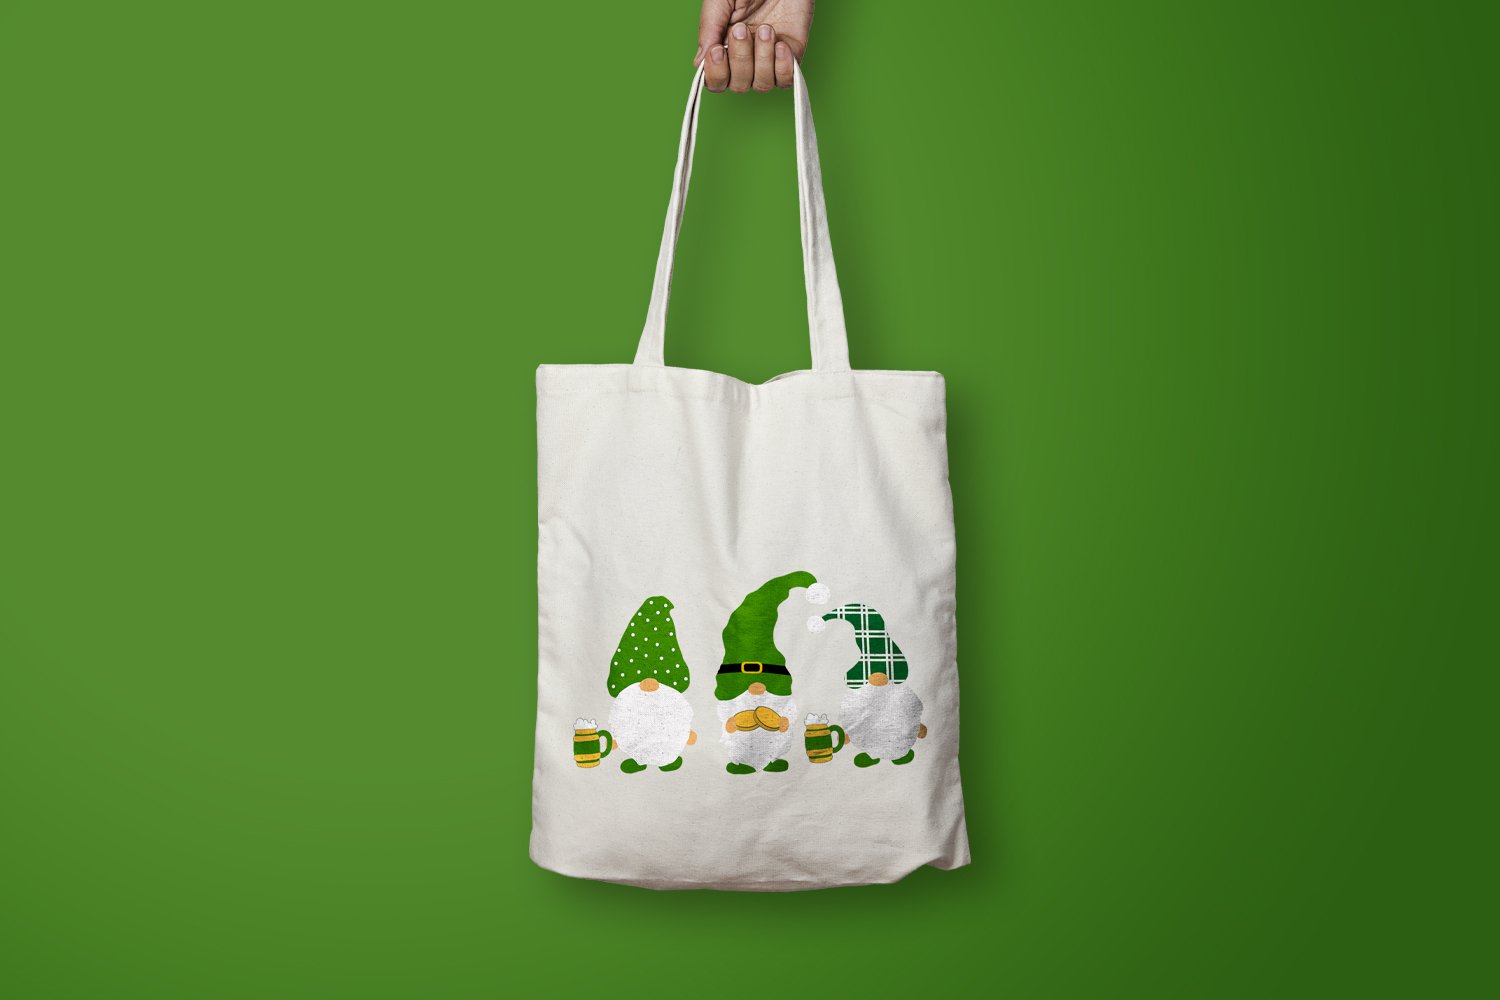 Eco bag with green gnome.